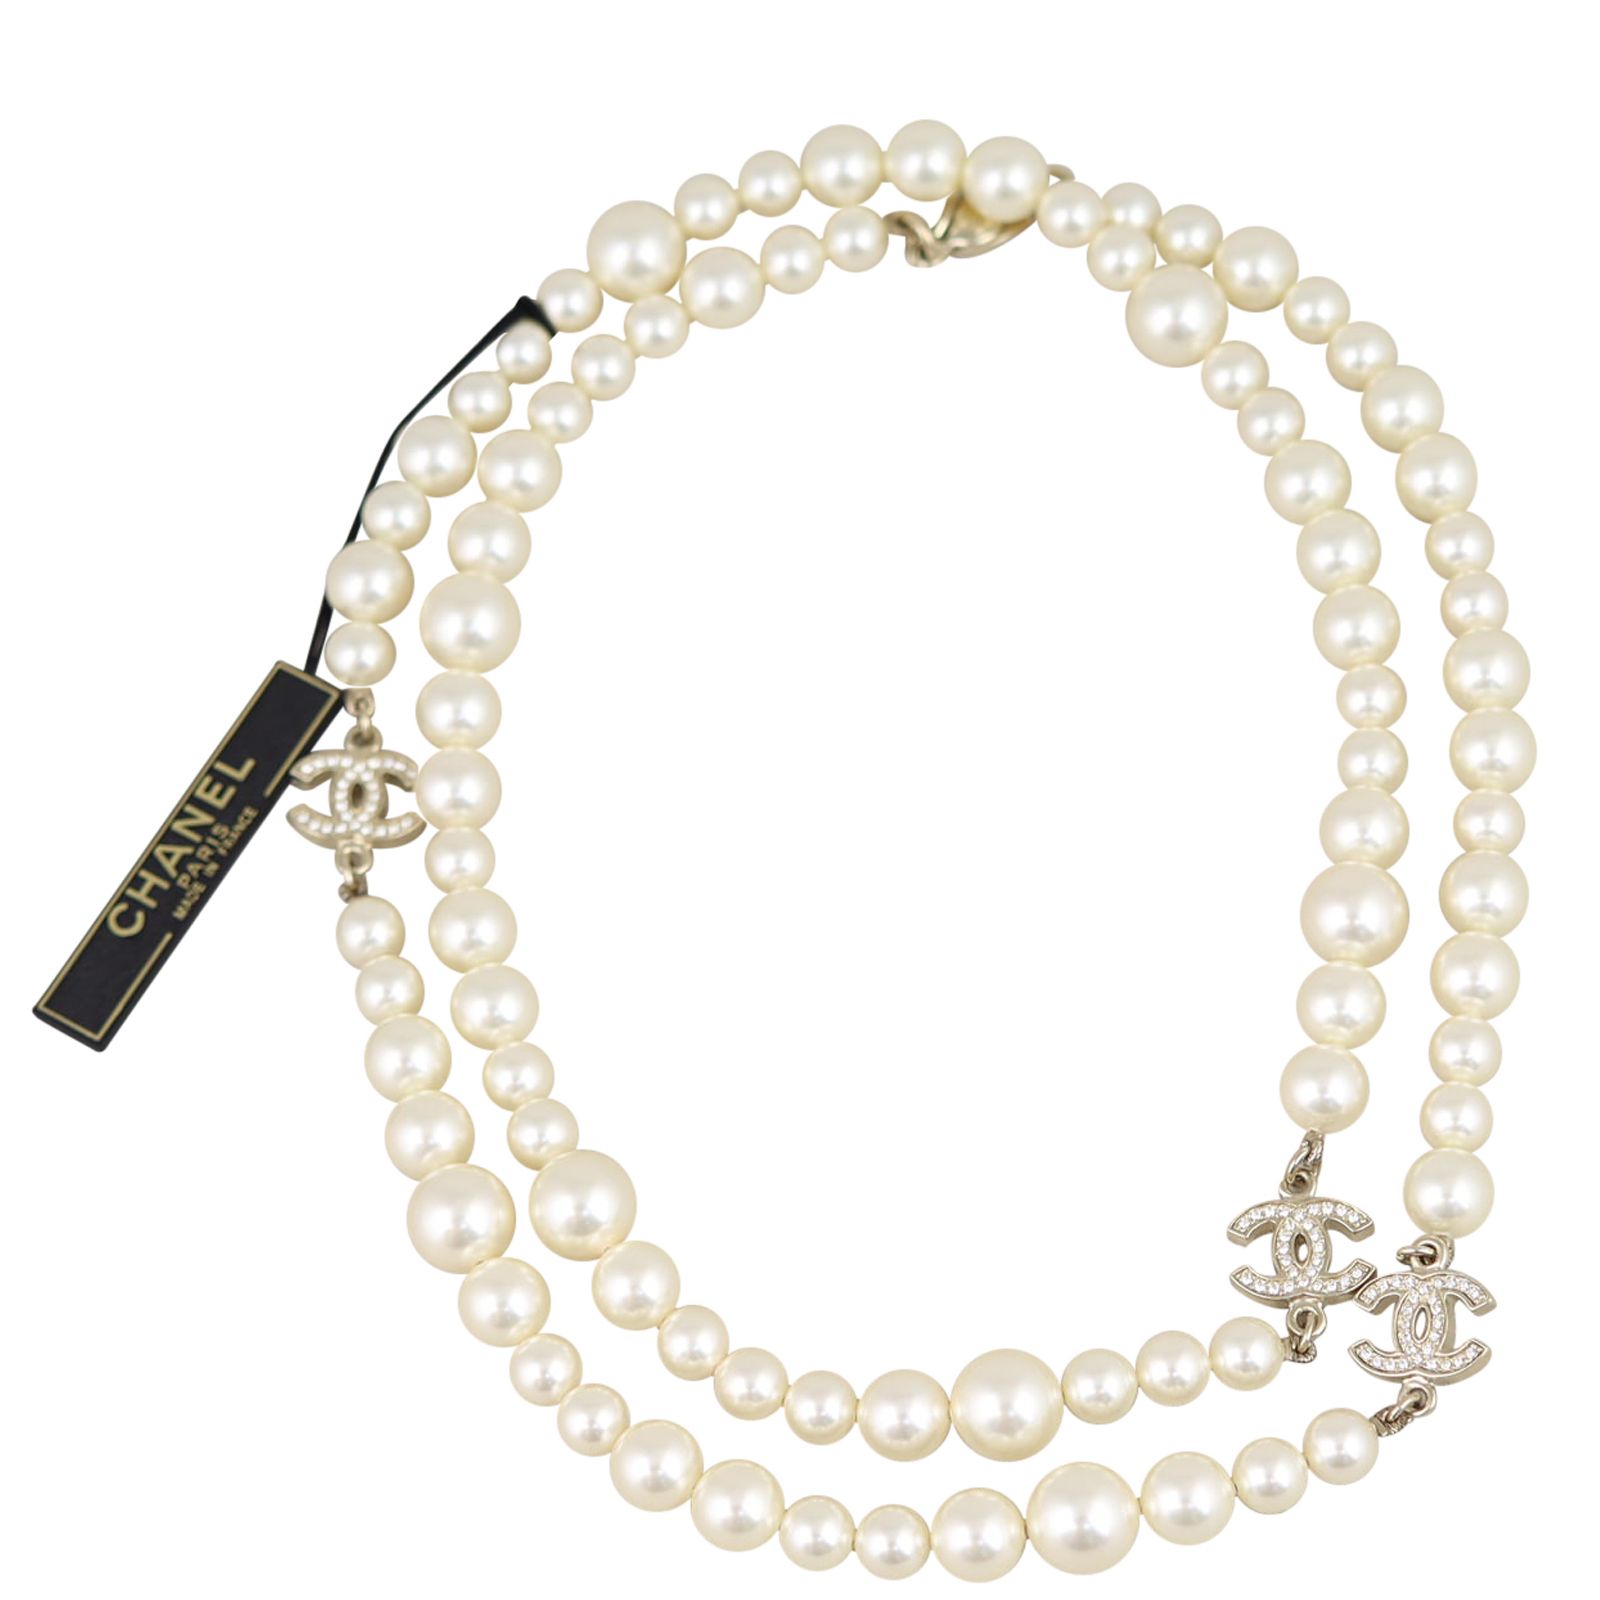 CHANEL  IVORY FAUX PEARL DOUBLE STRAND NECKLACE WITH FAUX PEARL  EMBELLISHED CC PENDANTS AND LOBSTER CLASP CLOSURE 2012  Handbags and  Accessories  2020  Sothebys